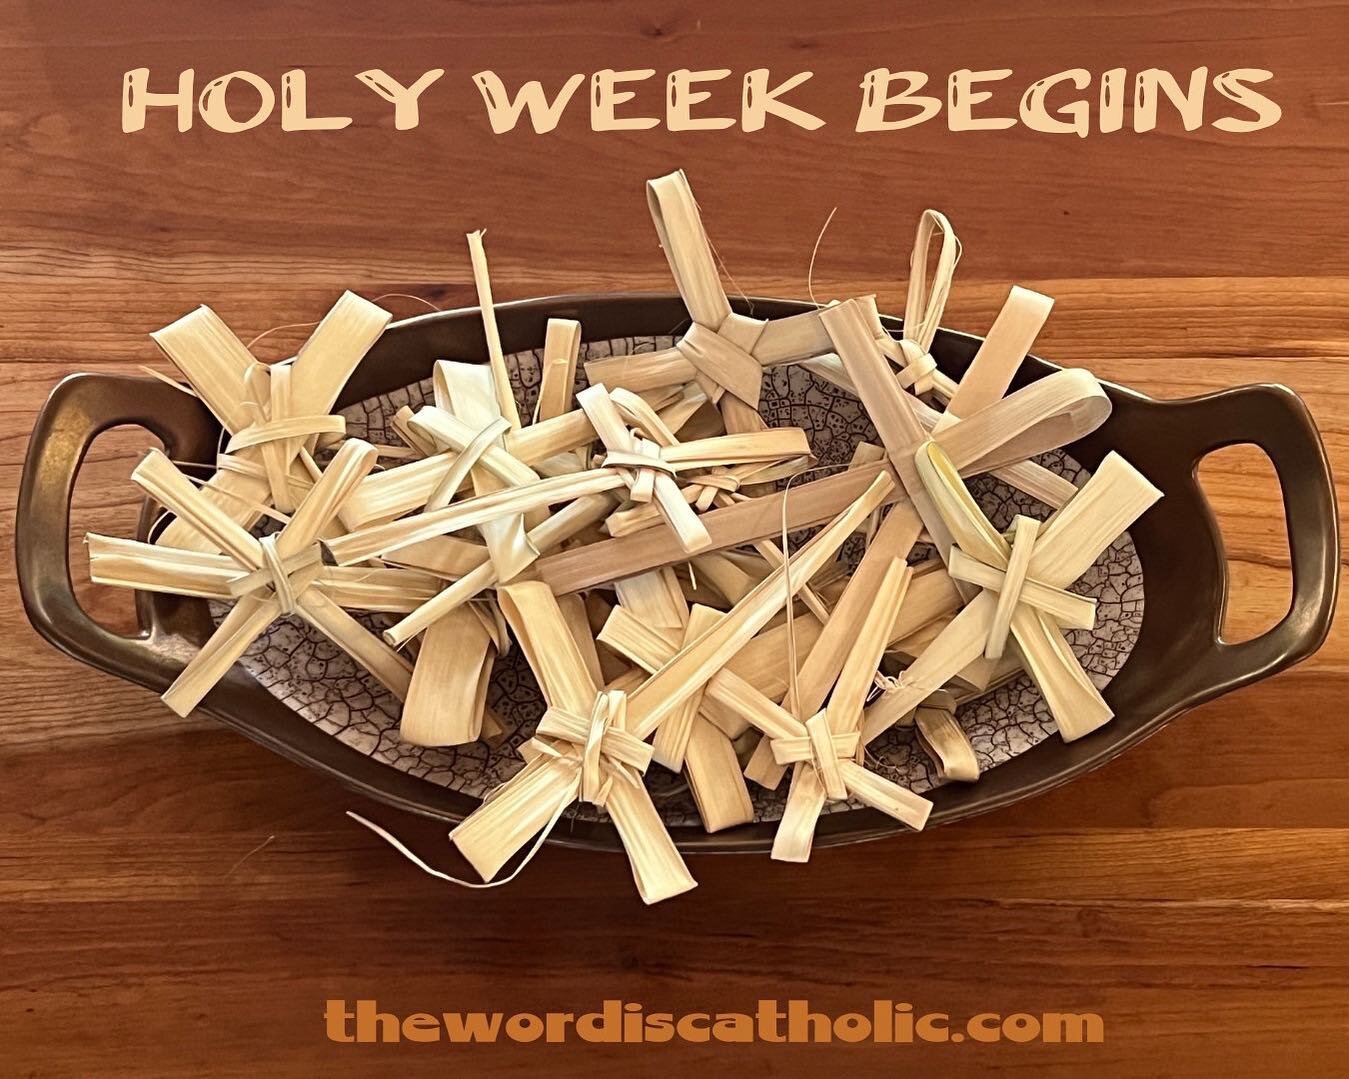 Palm Sunday marks the beginning of Holy Week. Jesus goes from his triumphant entry to Jerusalem to his Passion and Crucifixion and finally to the Resurrection. Prayers and contemplation will occupy our week. 
.
Peace be with you!
.
.
.
.
#prayer #ros